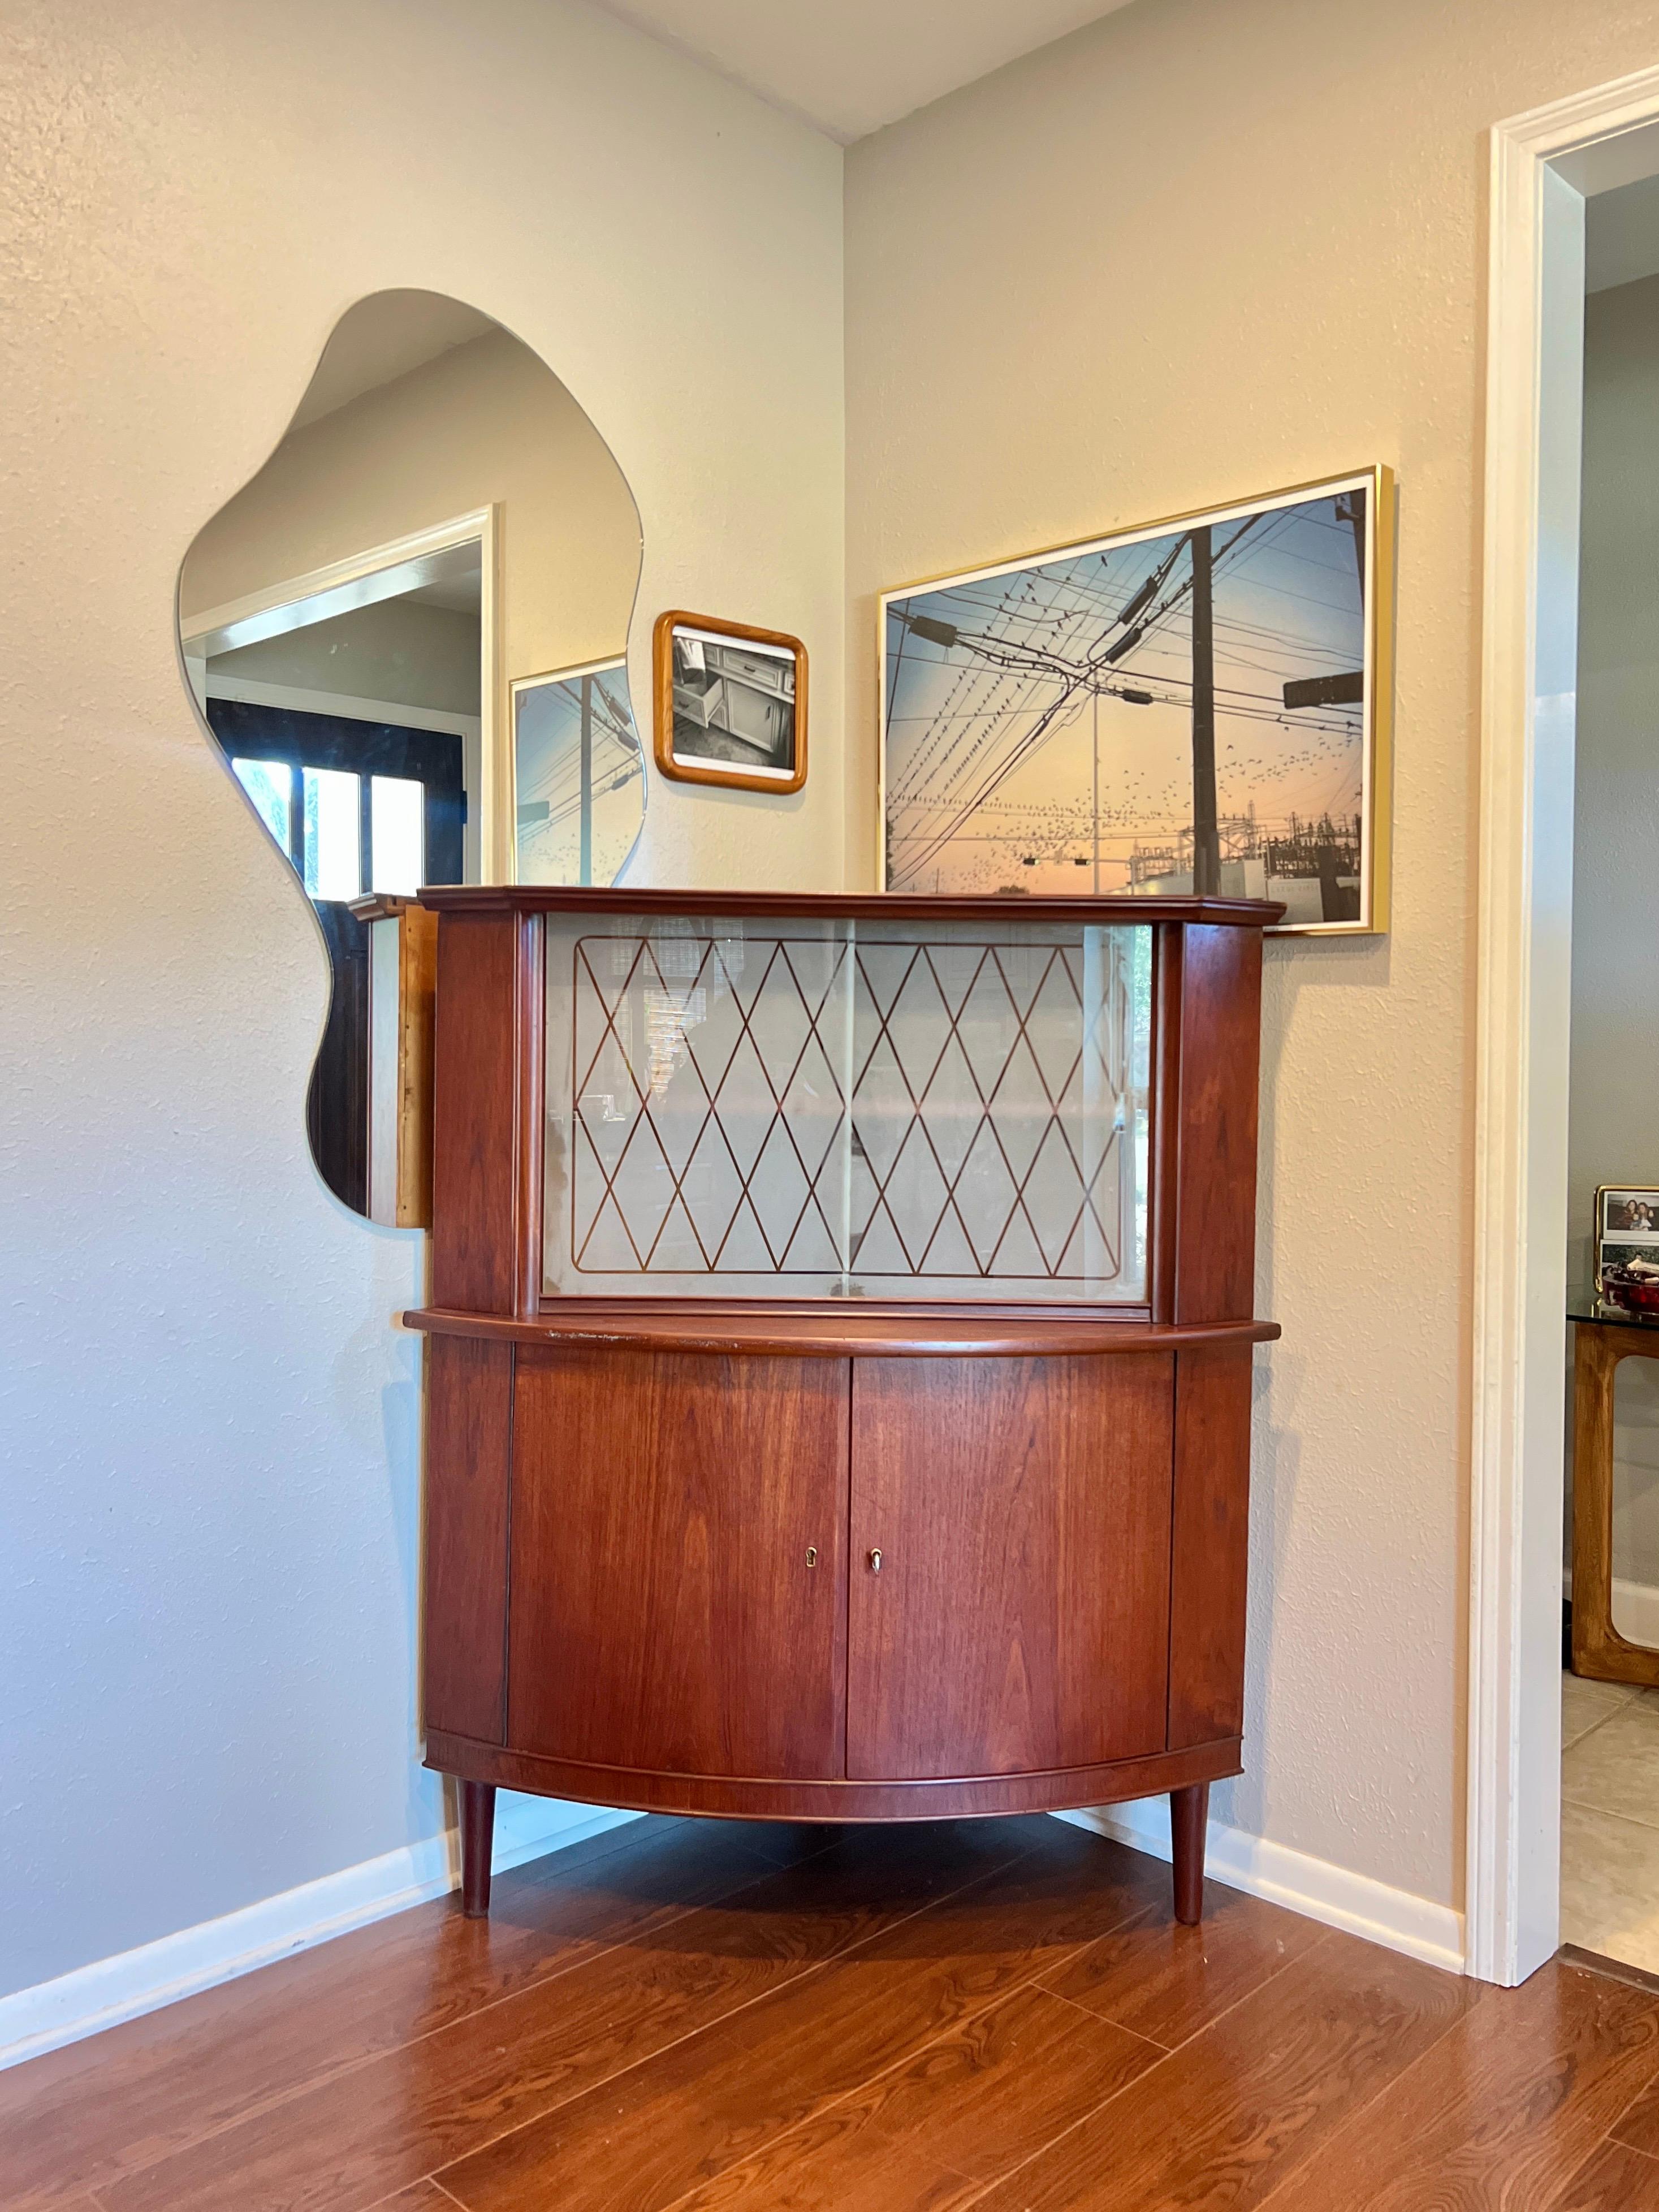 Gorgeous Danish teak corner cabinet/bar, circa 1960s. Made of solid and veneered teak with two glass doors on top and a pair of cabinet doors on the bottom. Key is included, but does not lock the cabinet. Overall in good original condition with some